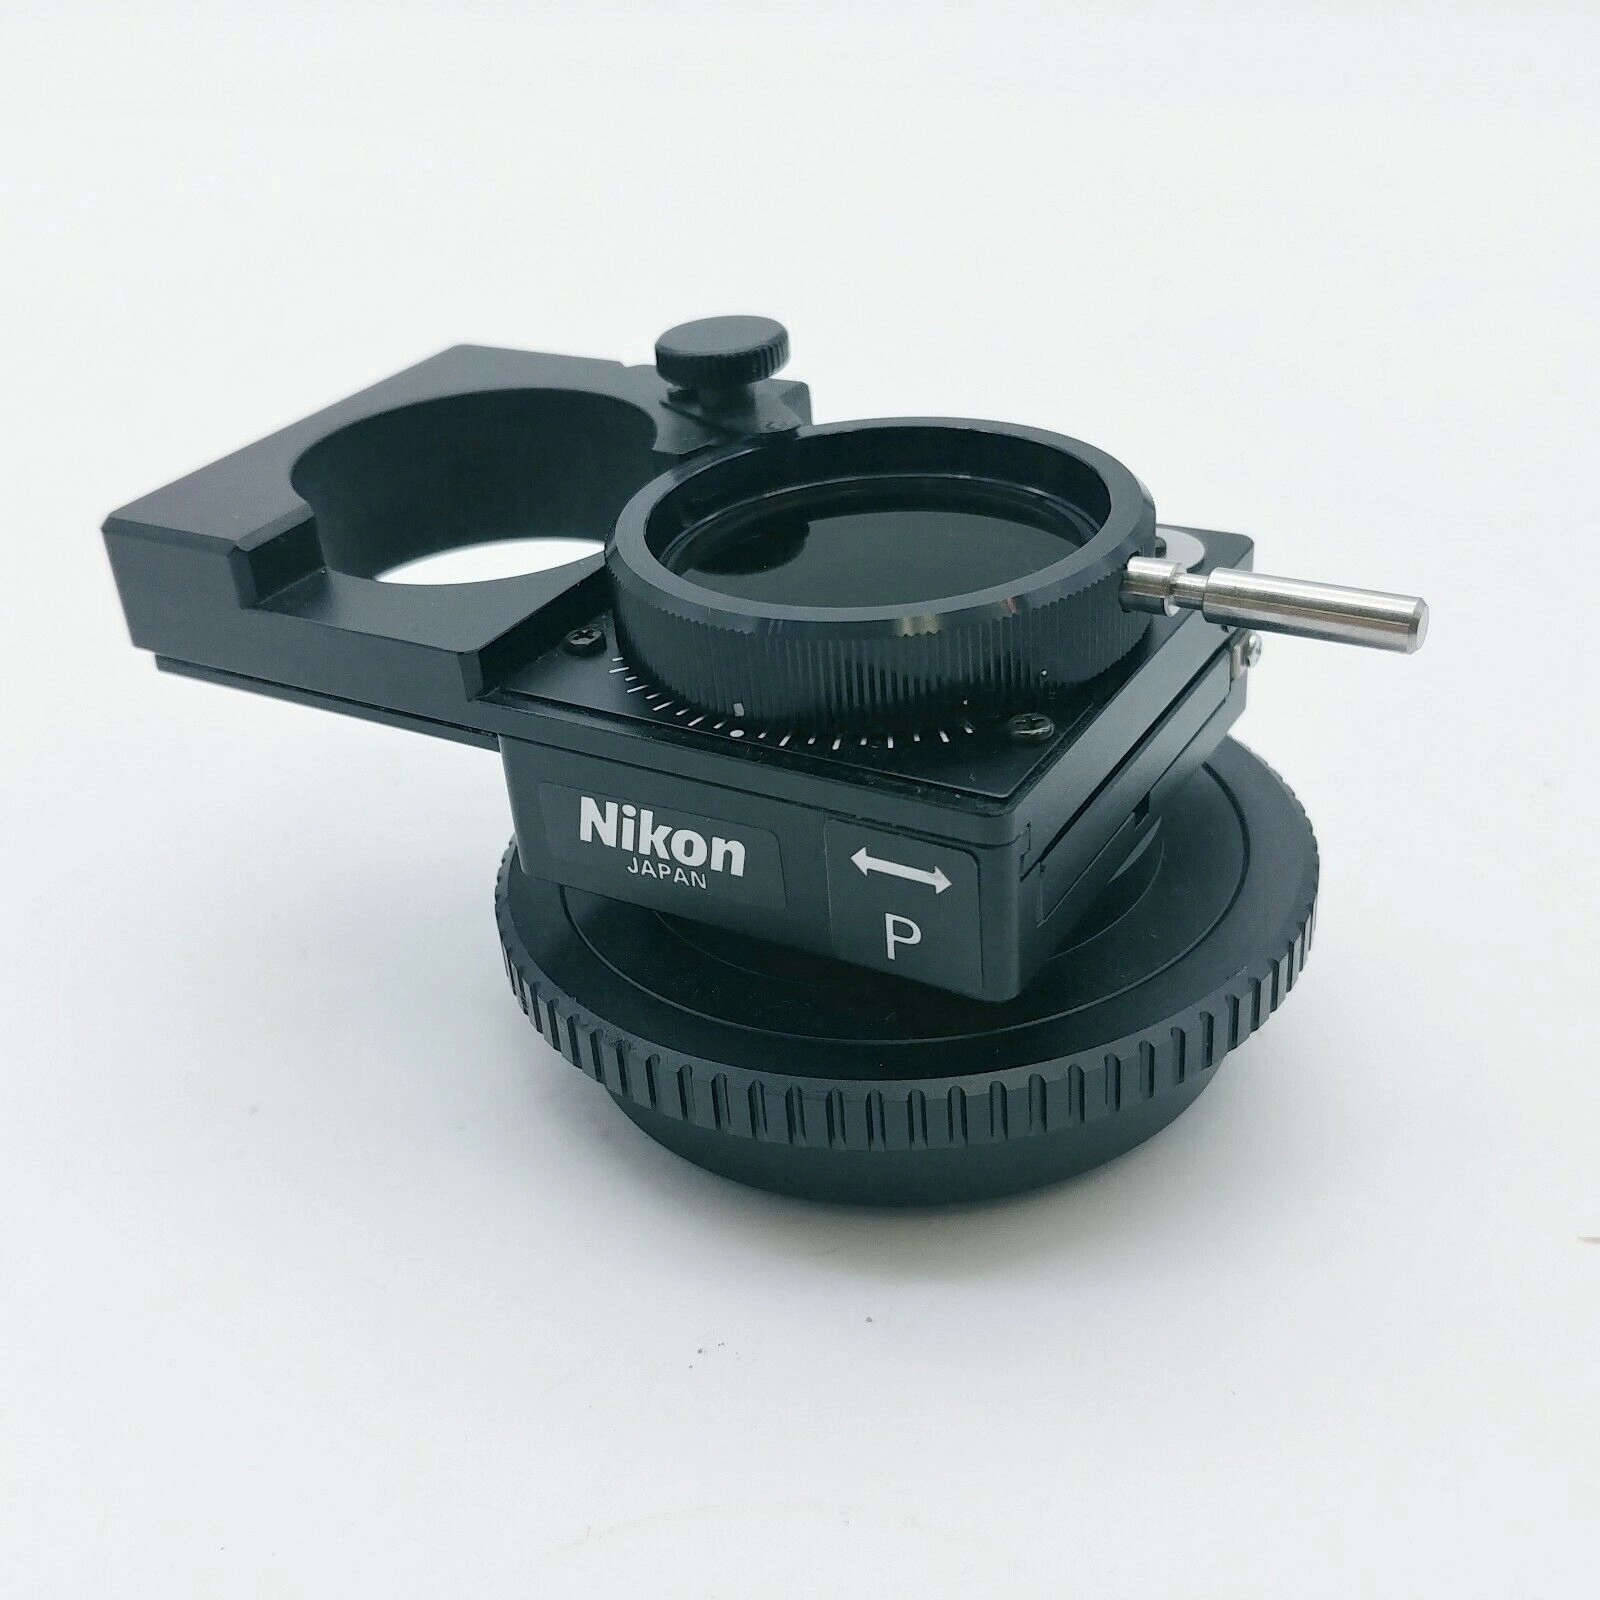 Nikon Microscope Slide Out Polarizer for use with DIC on TE200 / TE300 Inverted